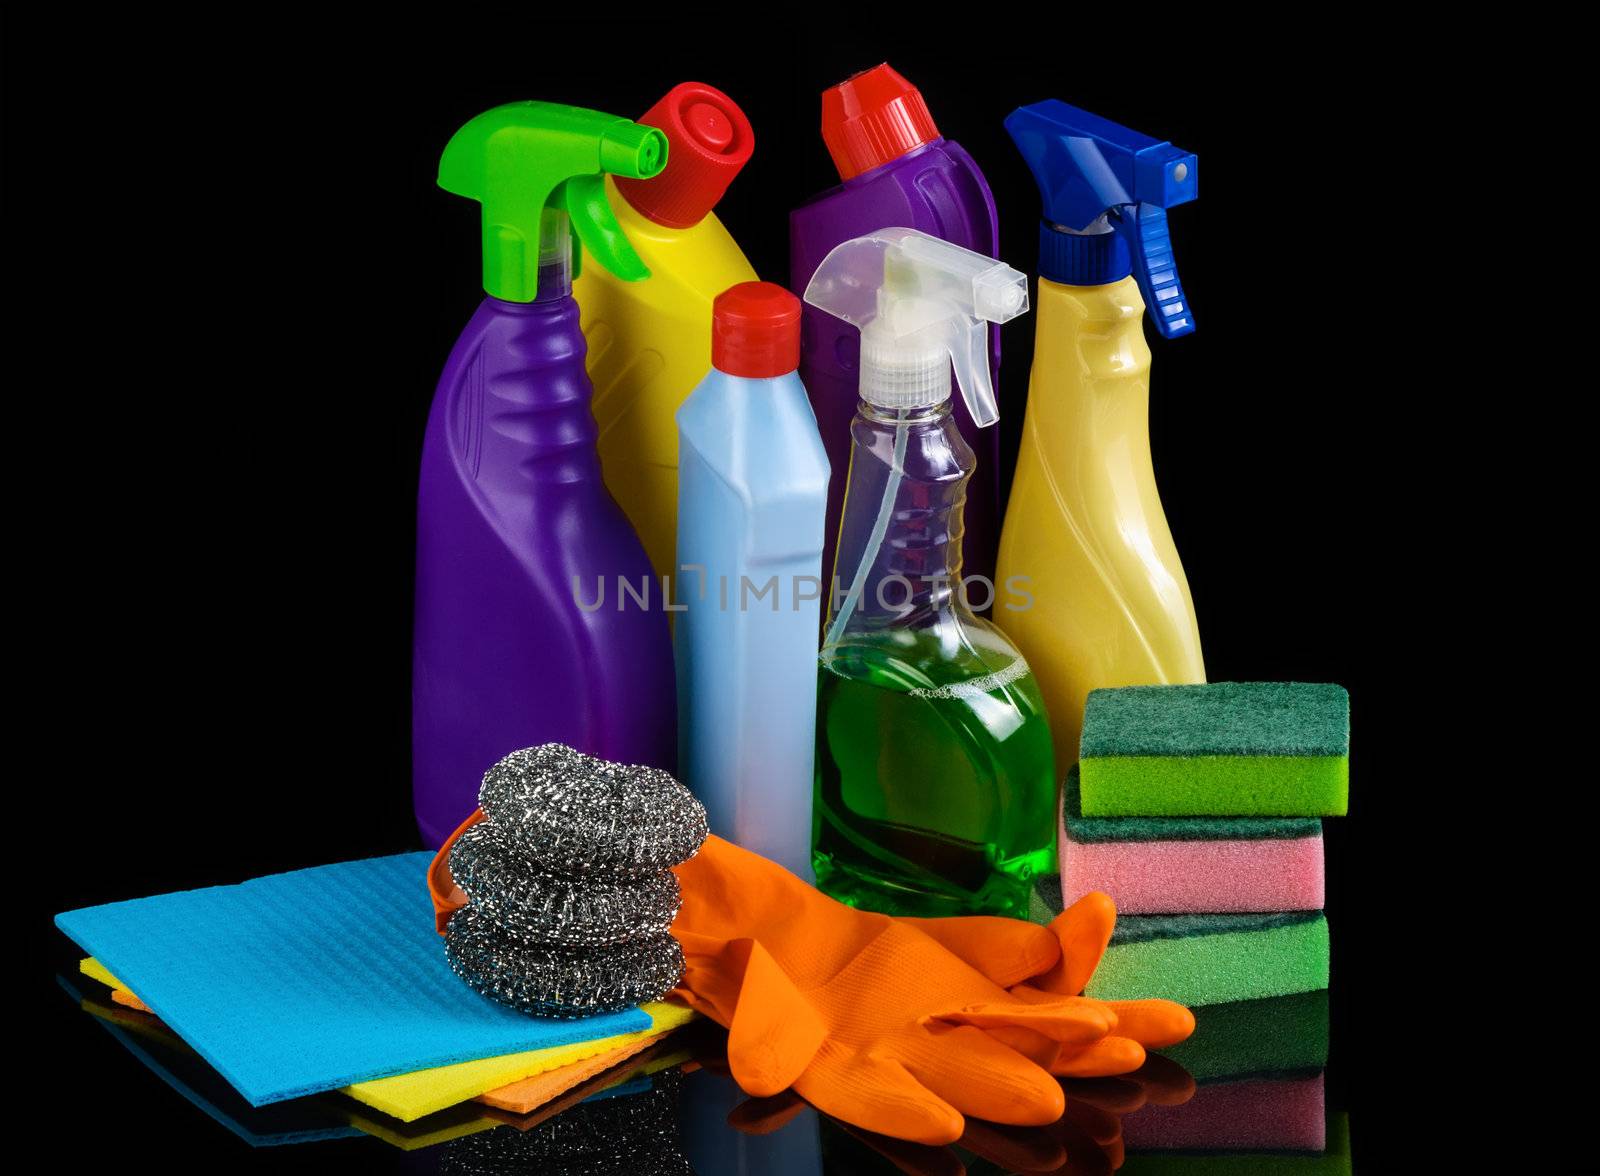 Cleaning set for home by Draw05